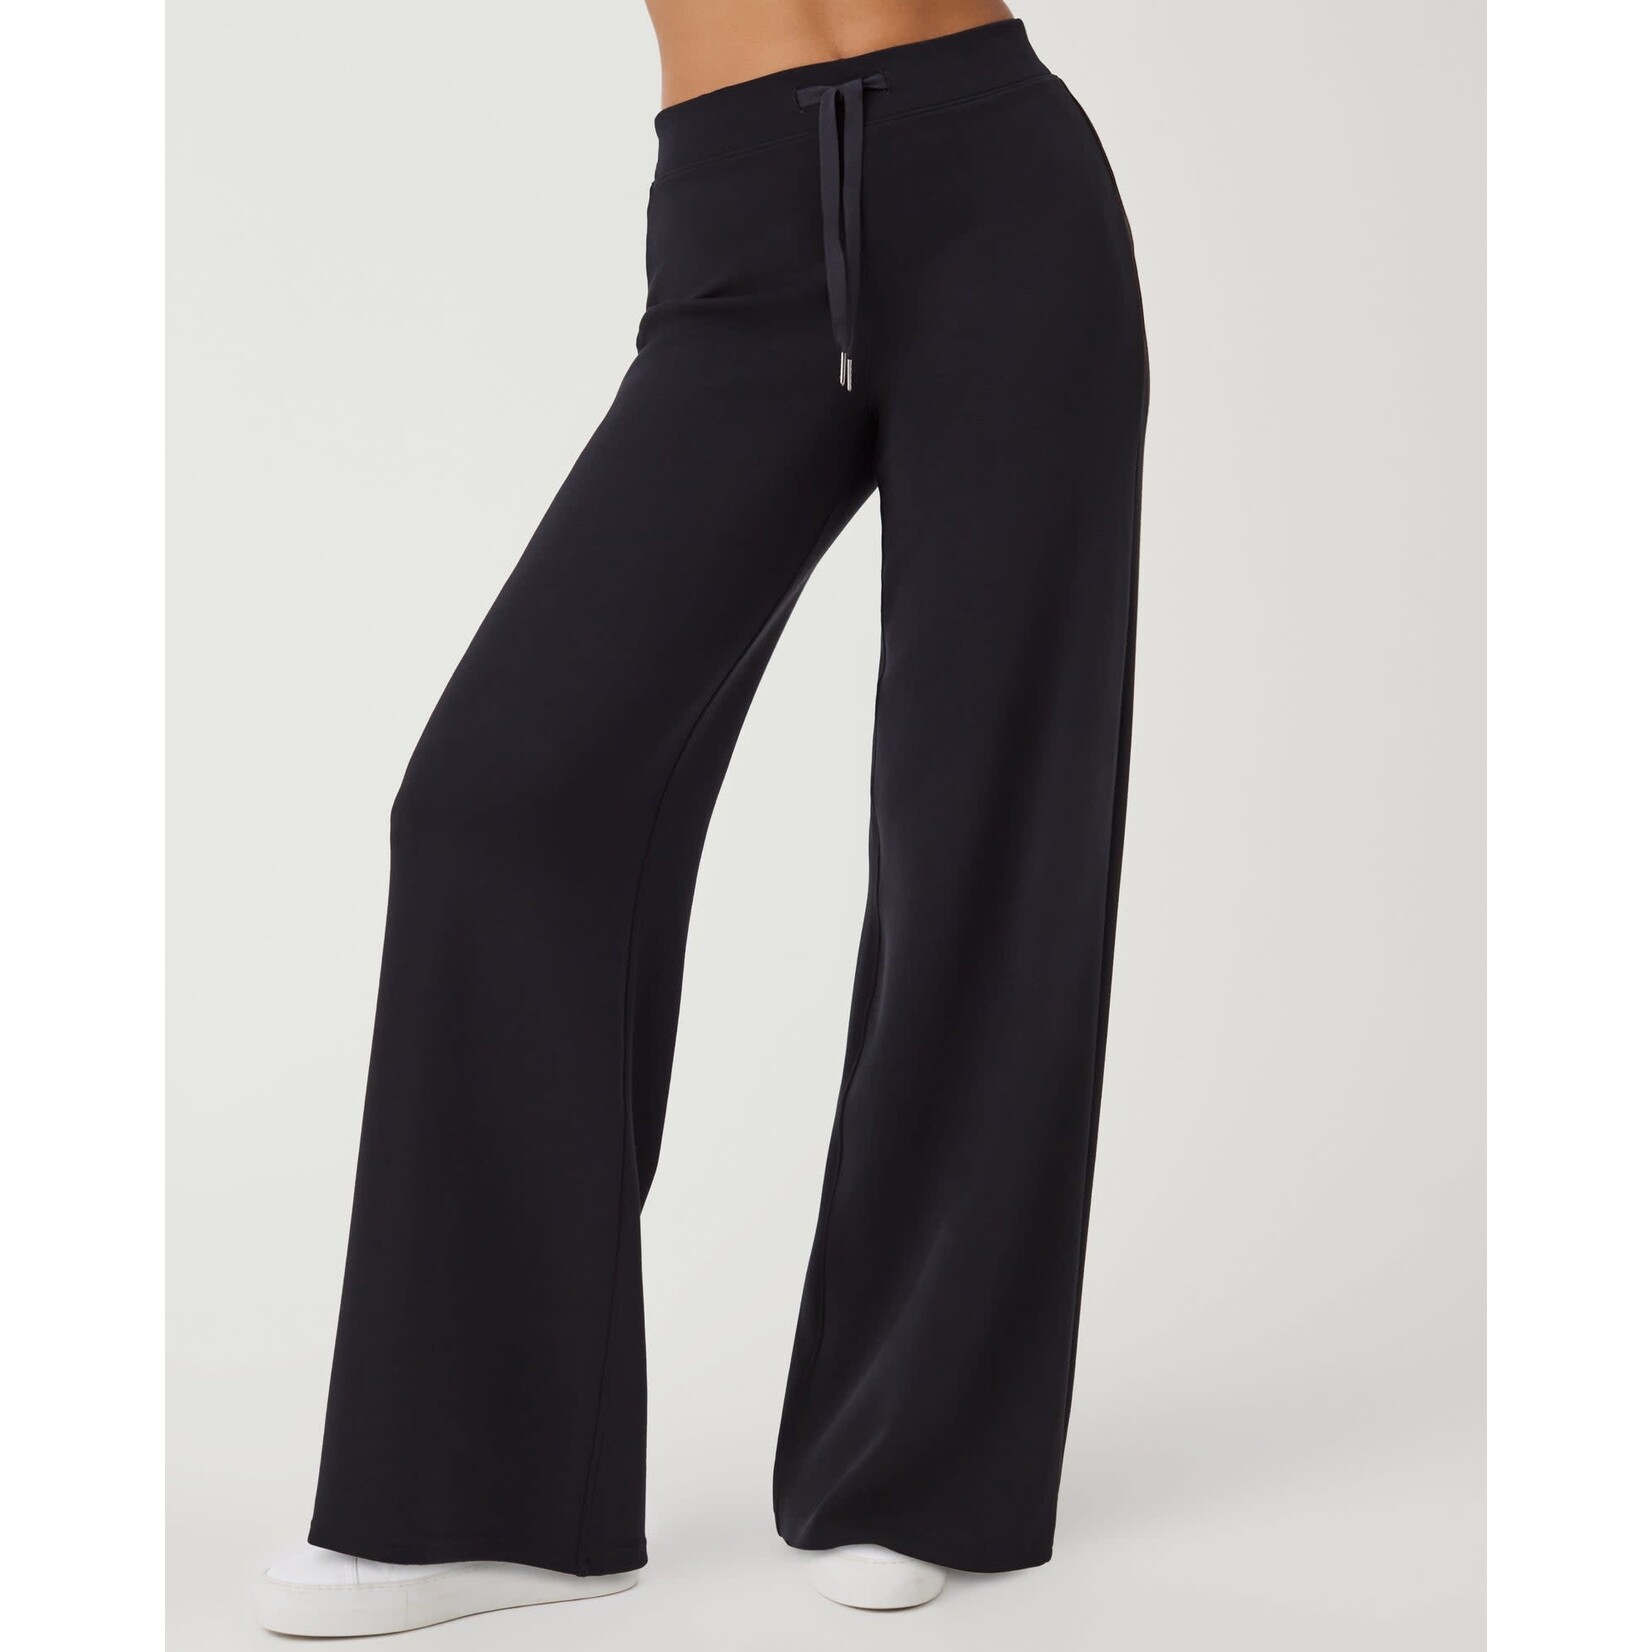 Spanx airessentials wide leg pant